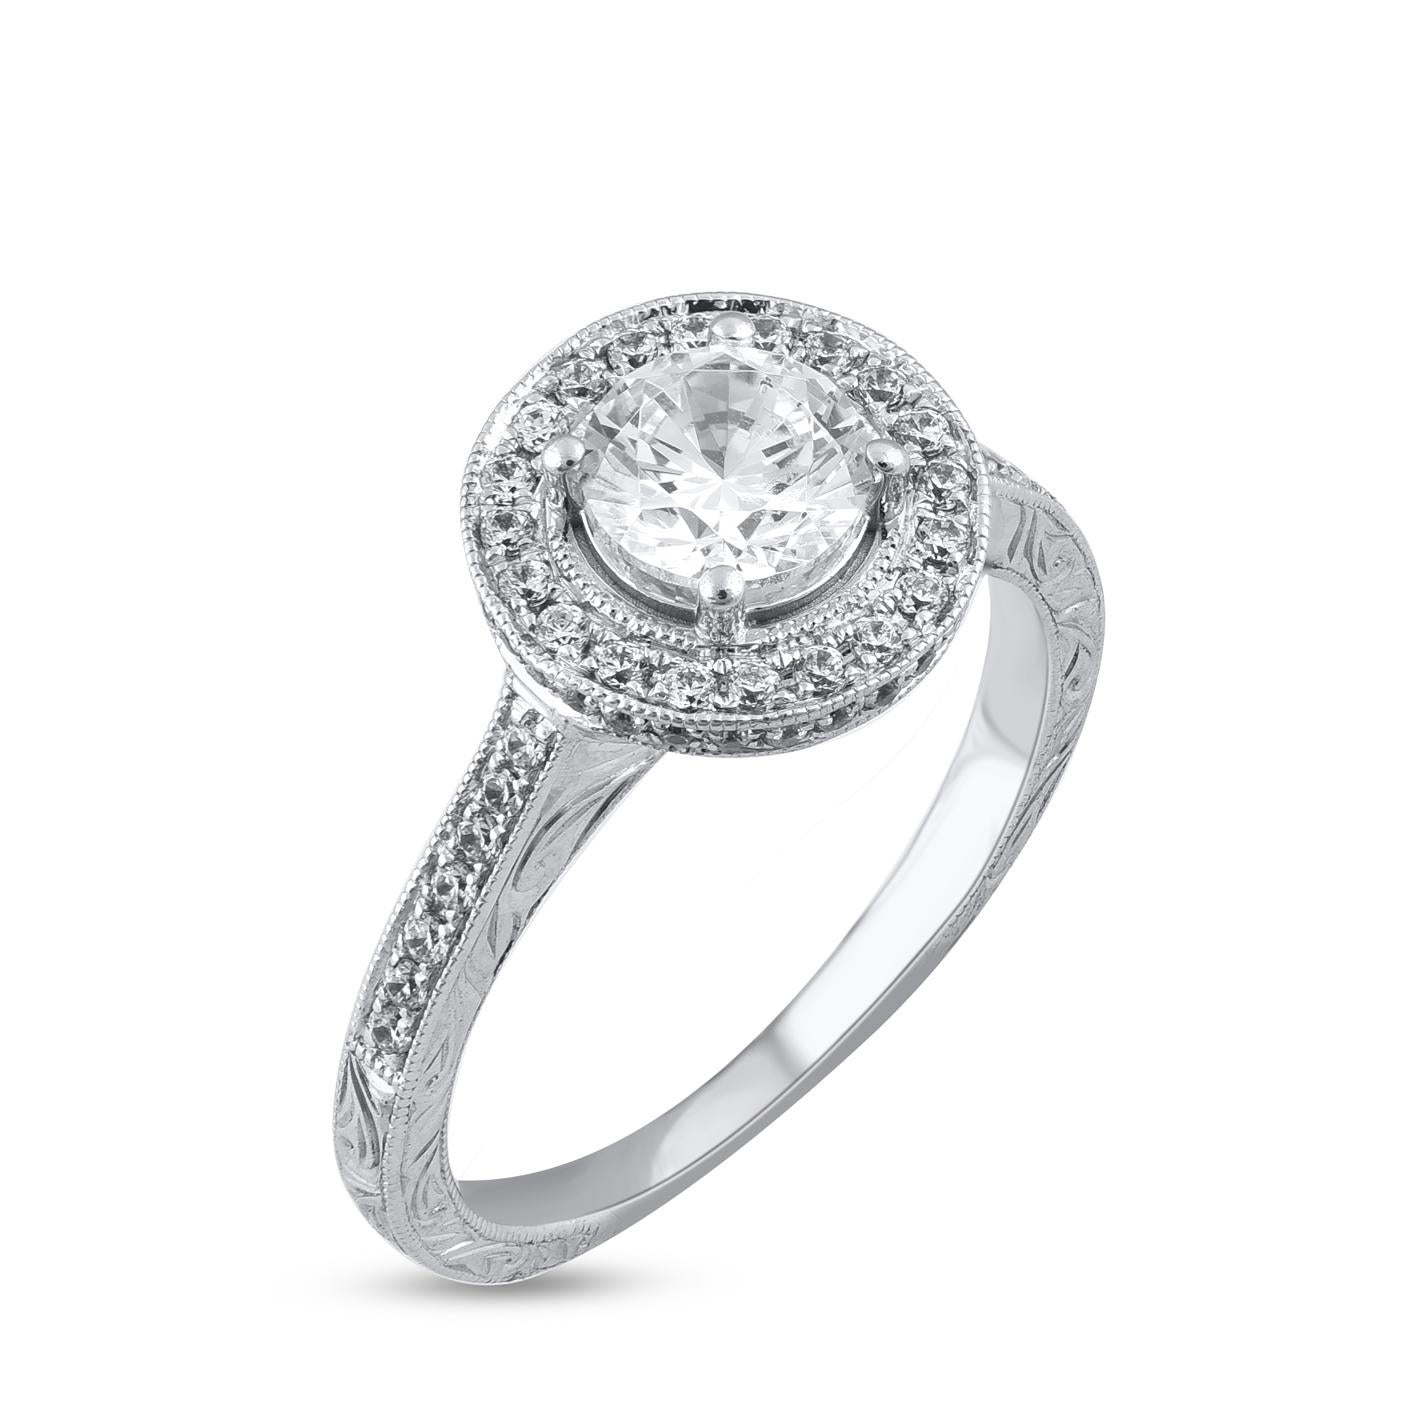 Make that special moment magical with the exquisite diamond bridal ring band. Hand crafted by our inhouse experts in 18 karat White gold, the engagement band ring features 0.84 ct of Centre stone and 0.41 ct of shank small accented diamond set in